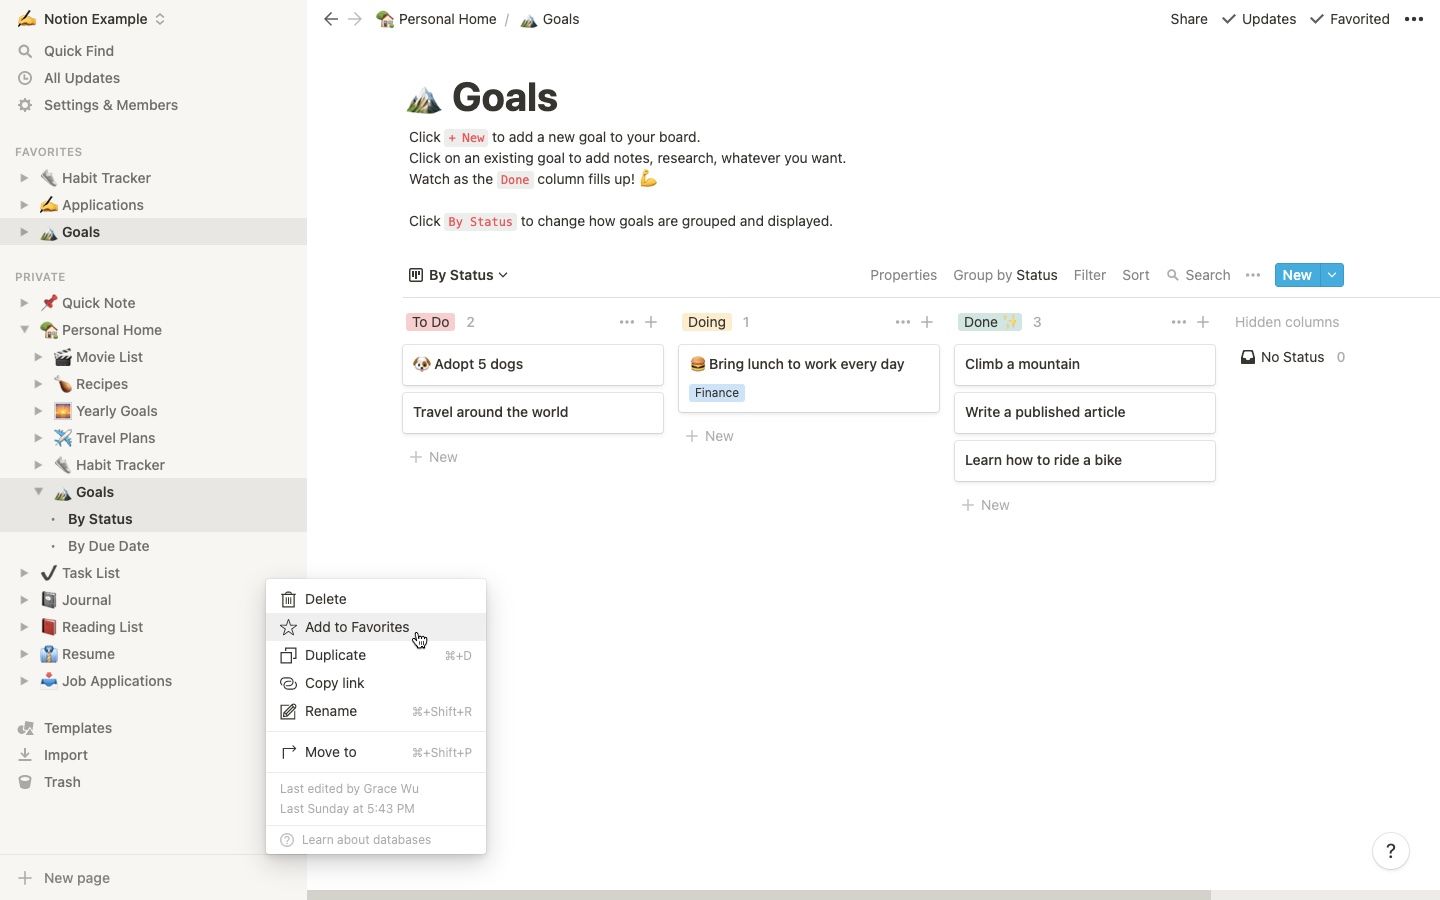 Adding favorite pages on Notion